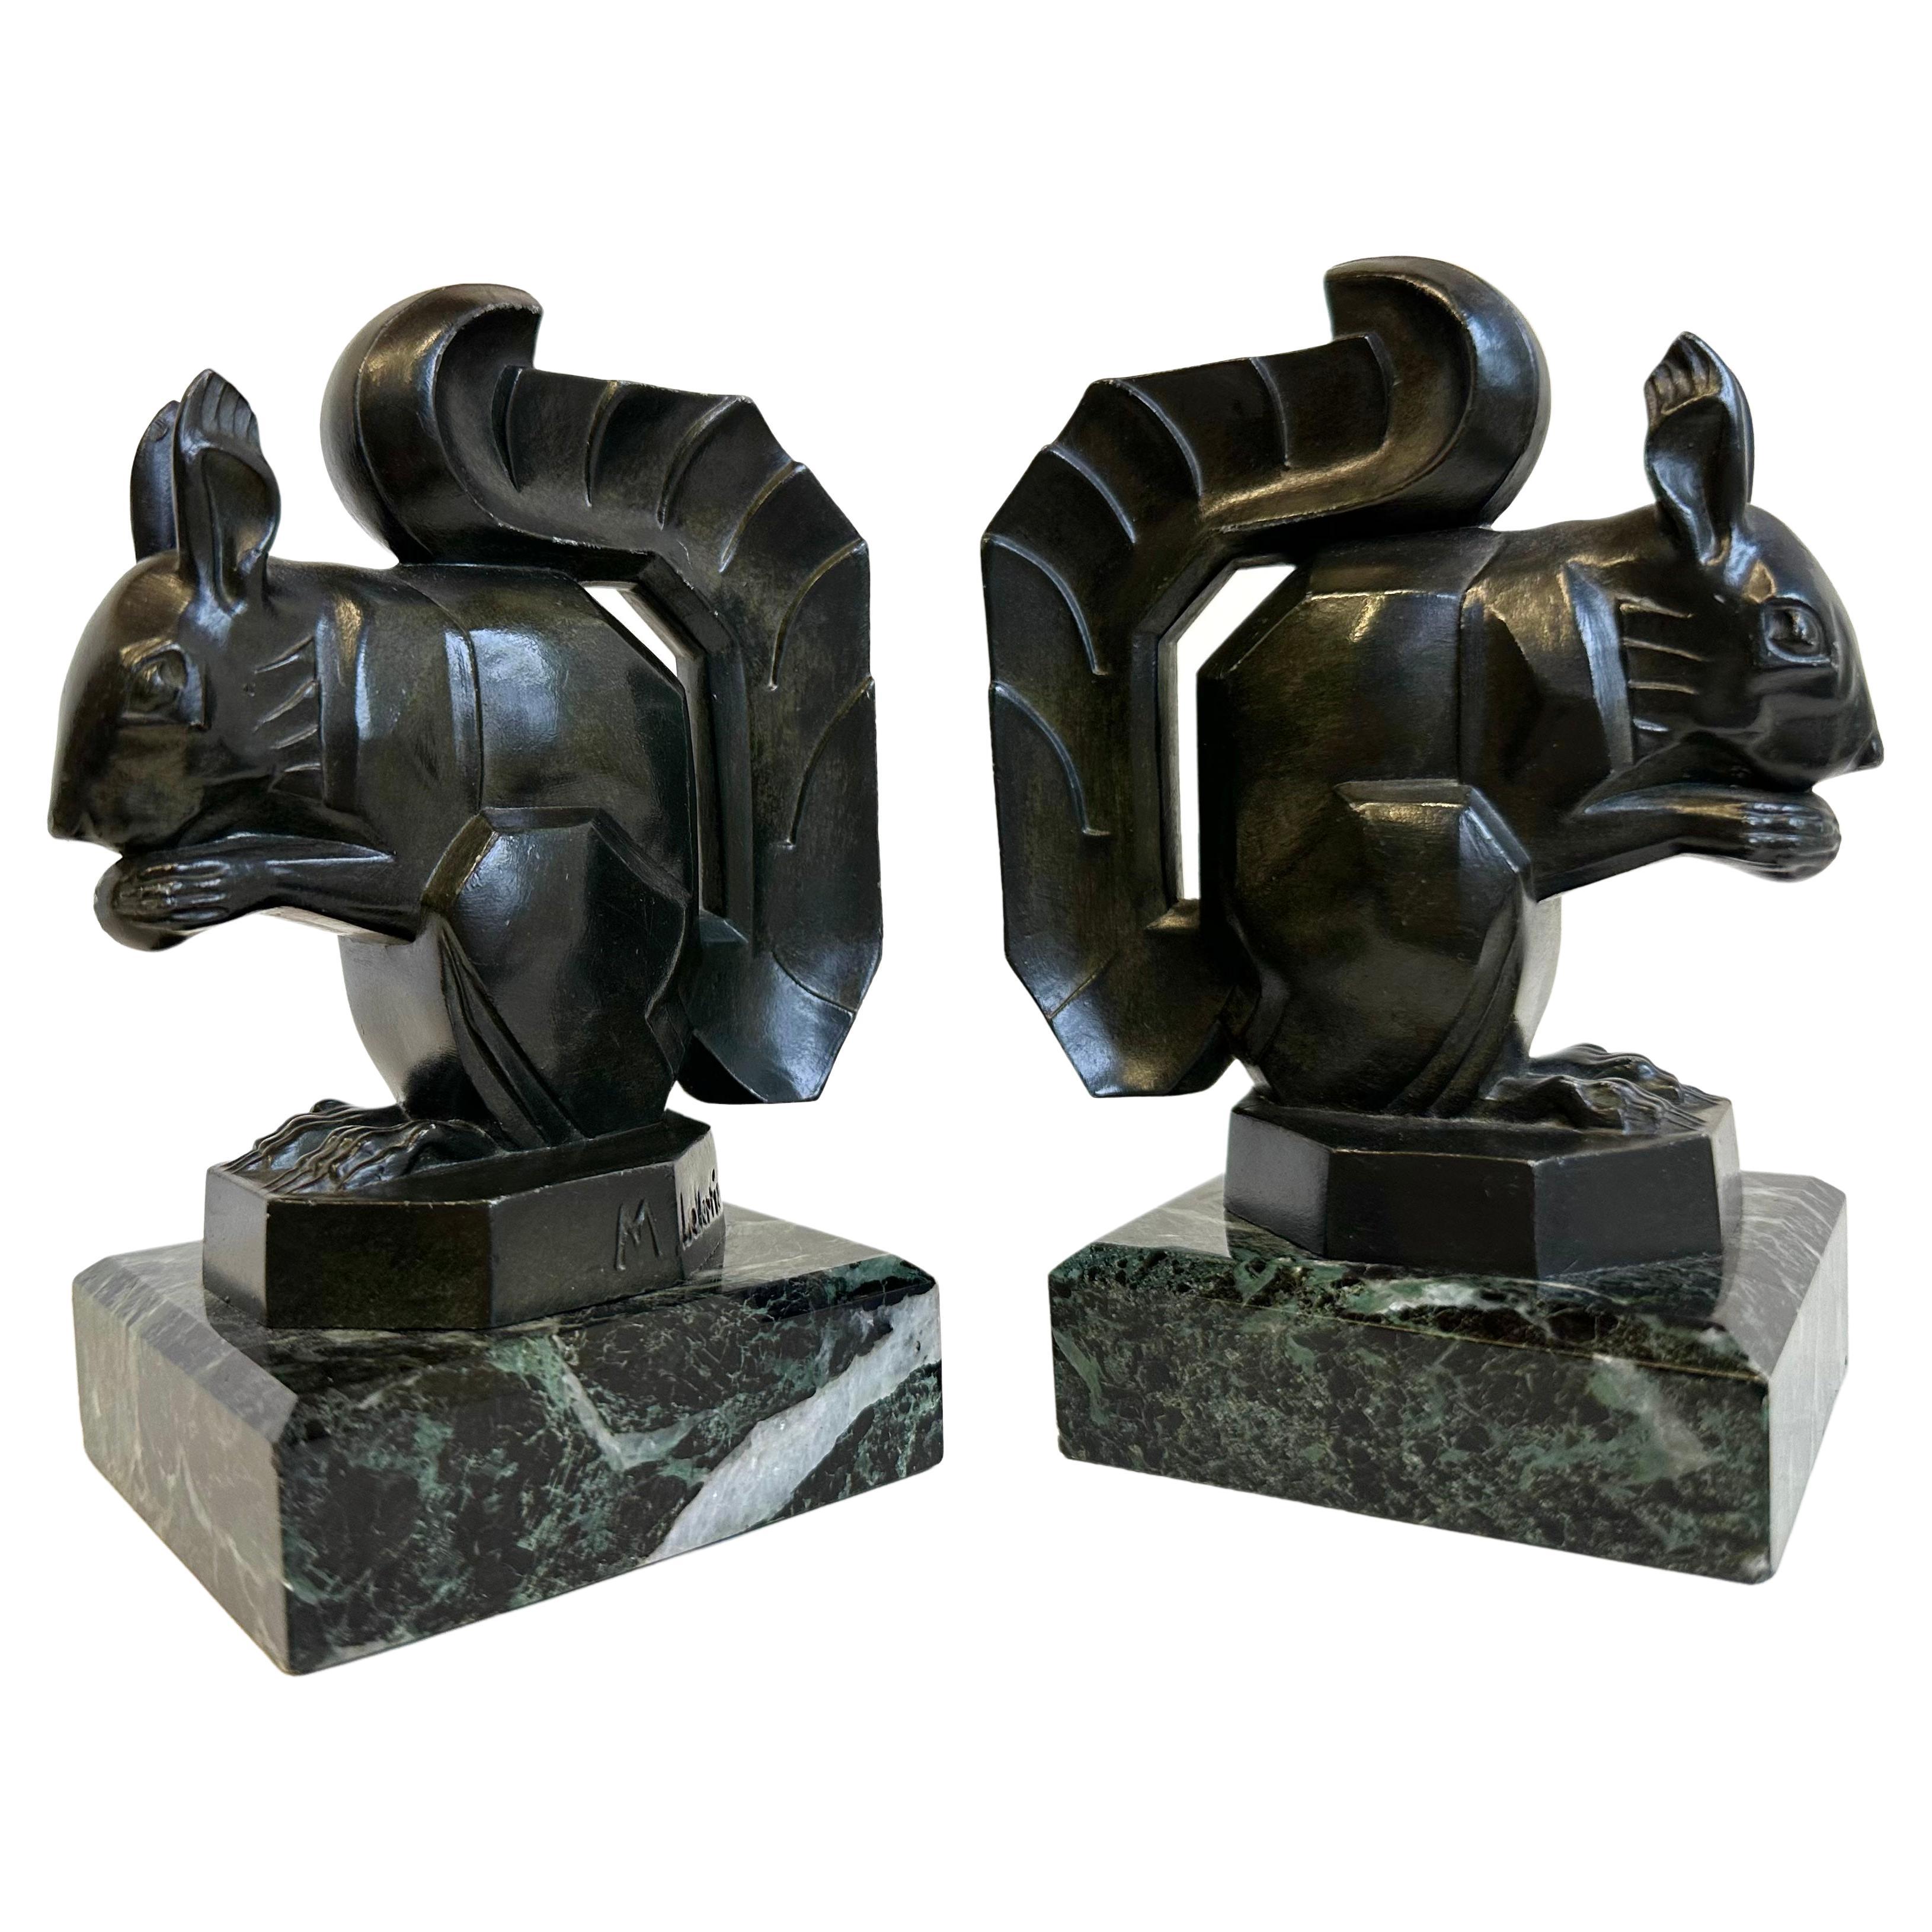 Antique Art Deco ''Squirrel'' Bookends by Max Le Verrier 1930 France Marble For Sale